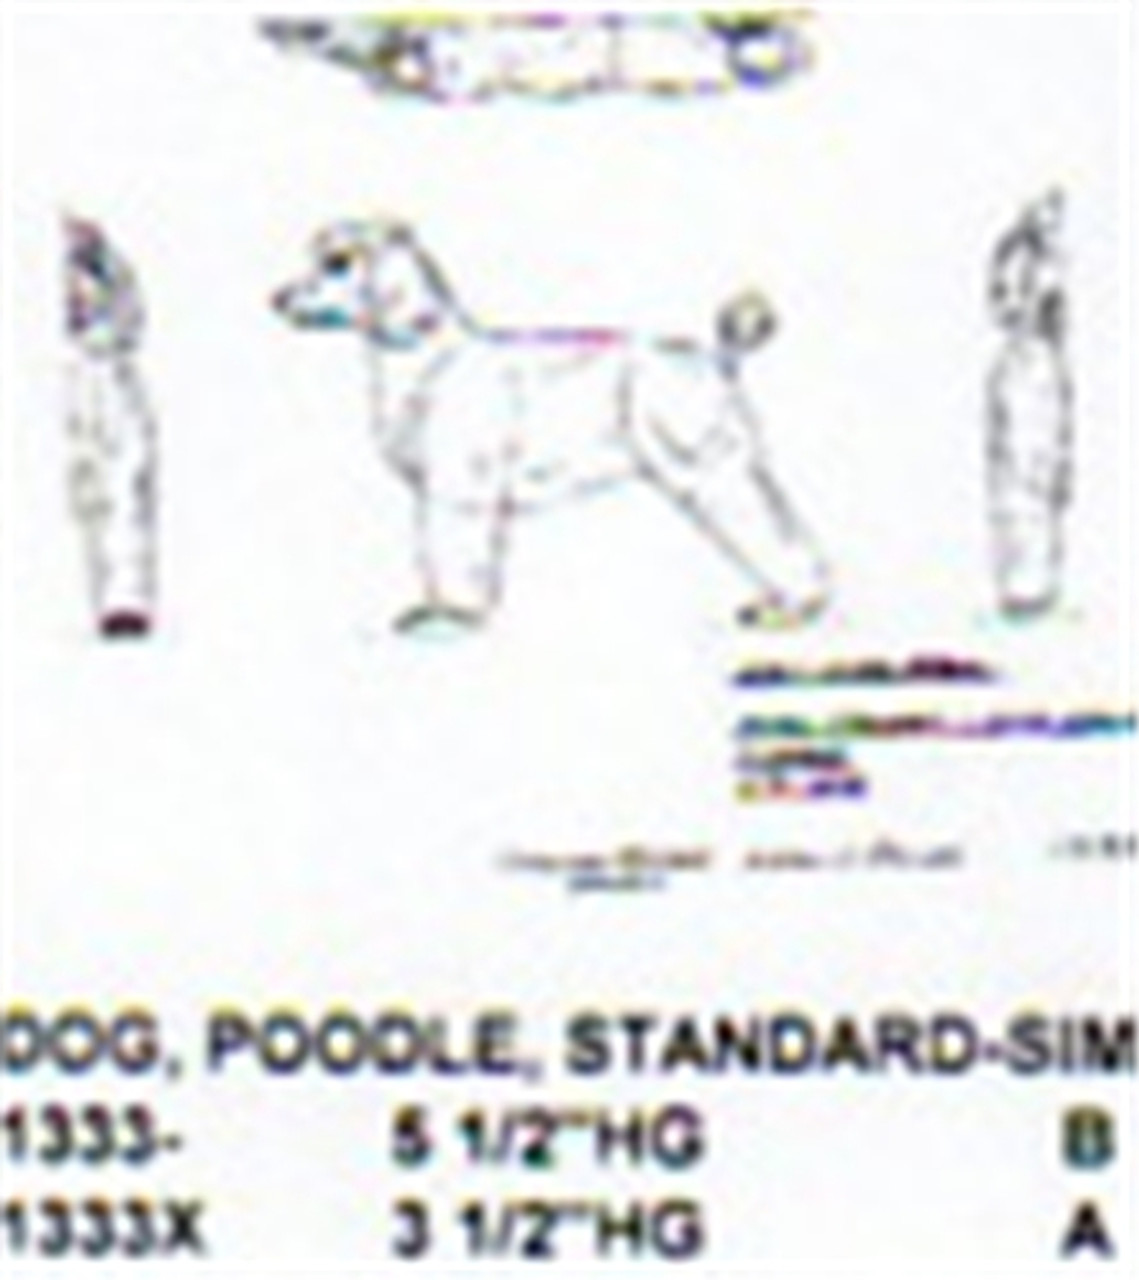 Standard Poodle Standing 5 1/2" High